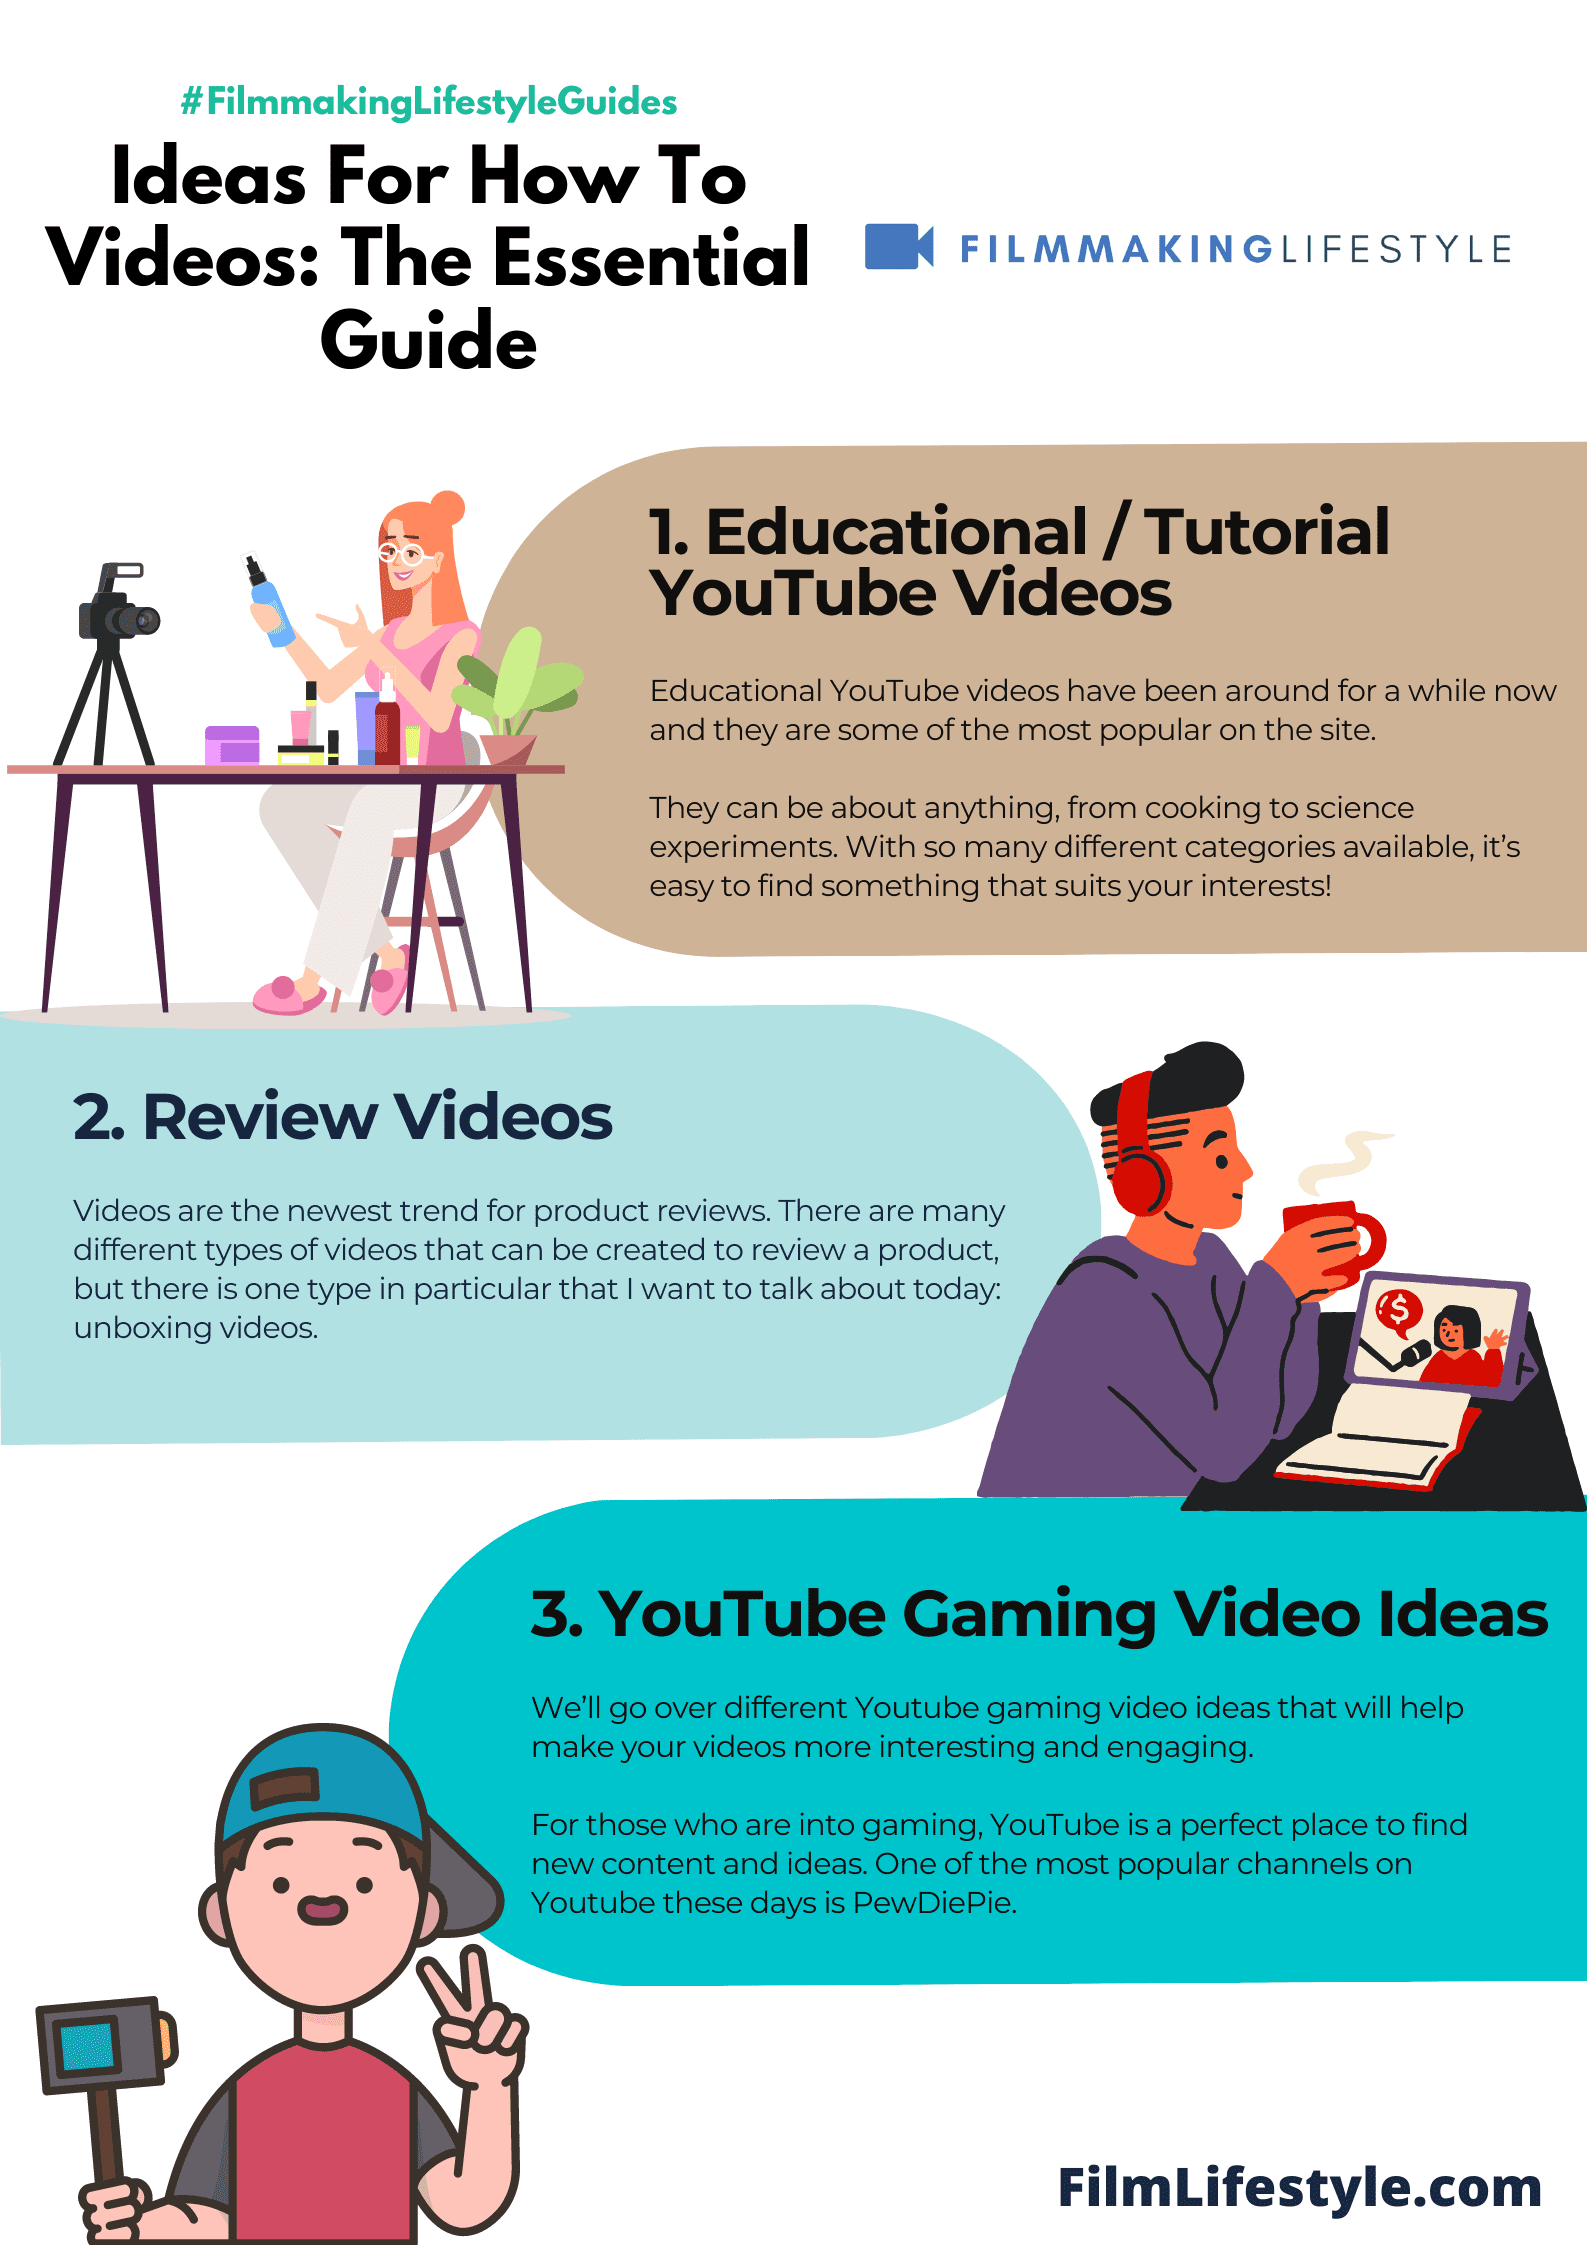 Ideas For How To Videos